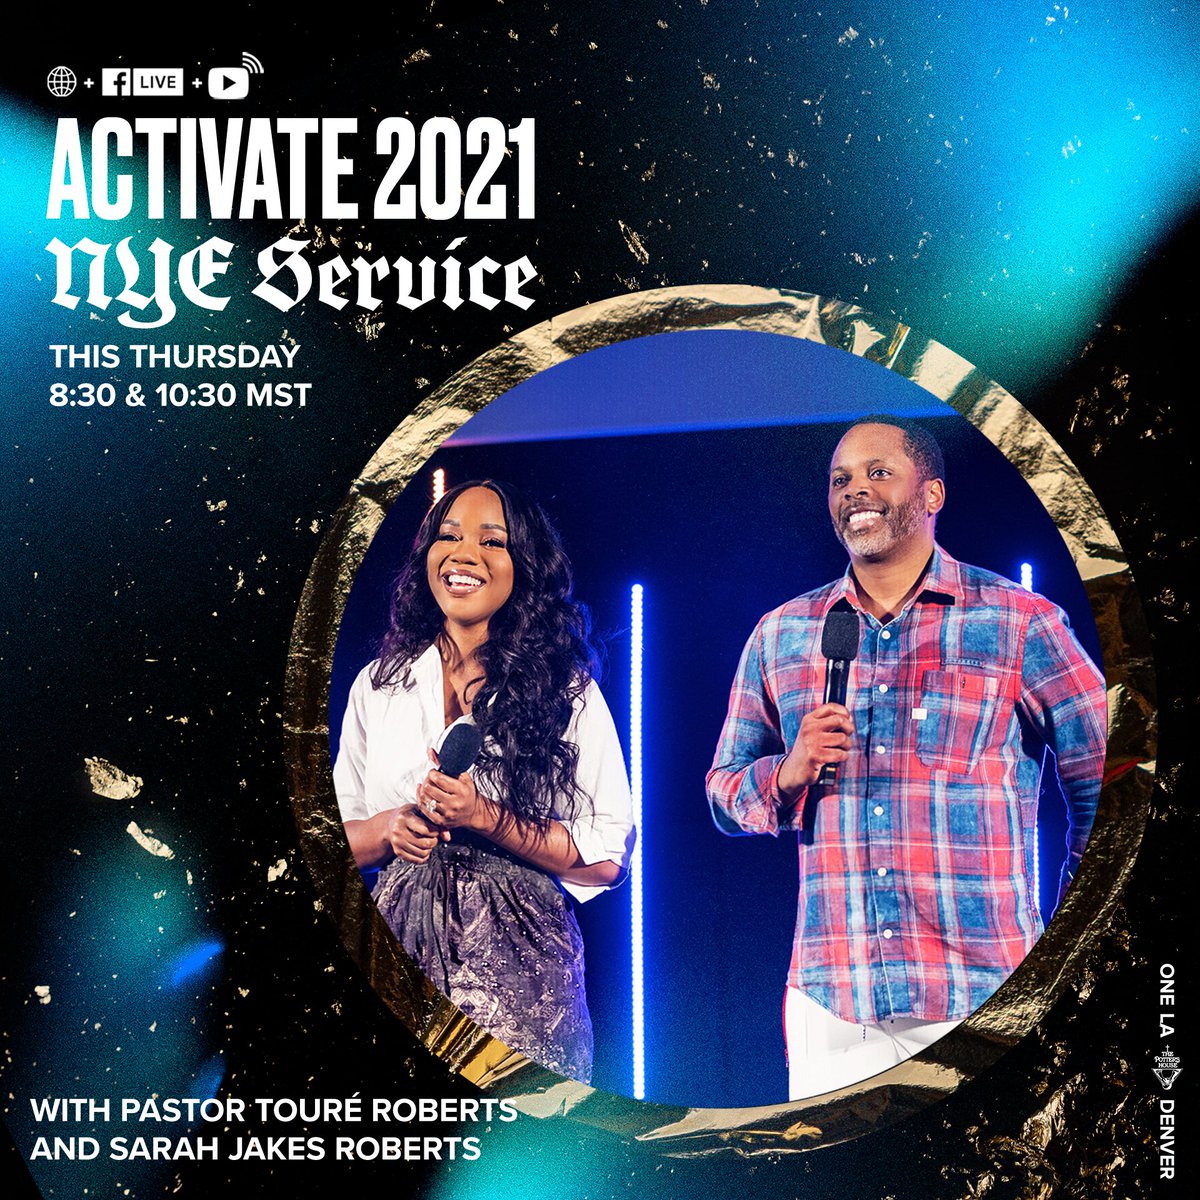 Bring in the new year Kingdom style! Join us for a special New Year’s Eve Activate Online Service with Pastors @ToureRoberts and @SarahJakesRoberts! ___ ✨ NYE x ACTIVATE ONLINE ✨ WHEN: THURSDAY (NYE) @ 8:30pm & 10:30pm MST WHERE: YouTube, FB Live, & Our Website